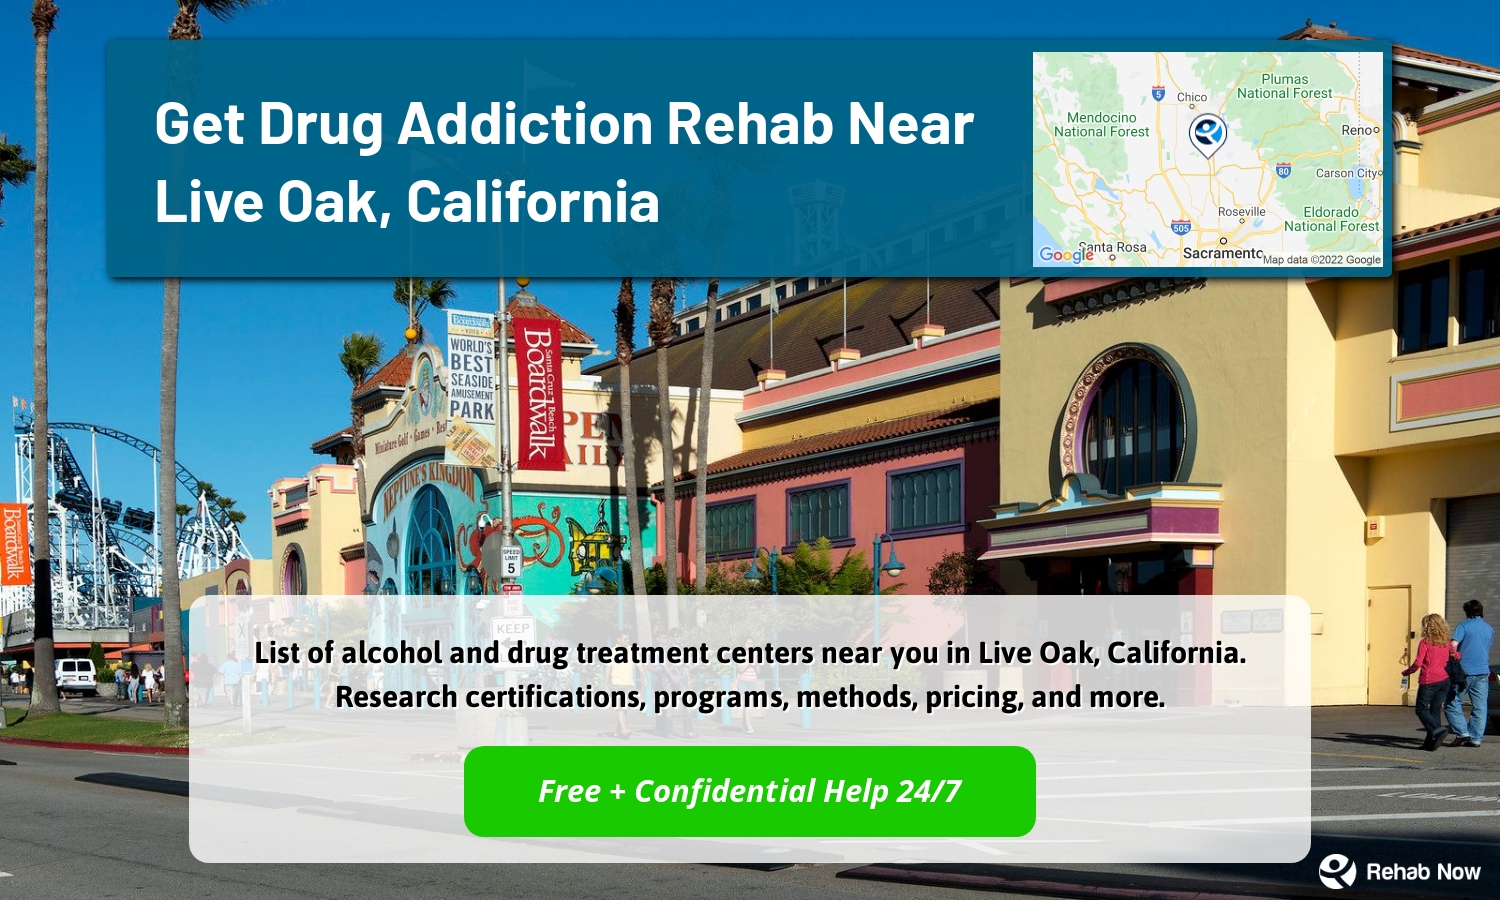 List of alcohol and drug treatment centers near you in Live Oak, California. Research certifications, programs, methods, pricing, and more.